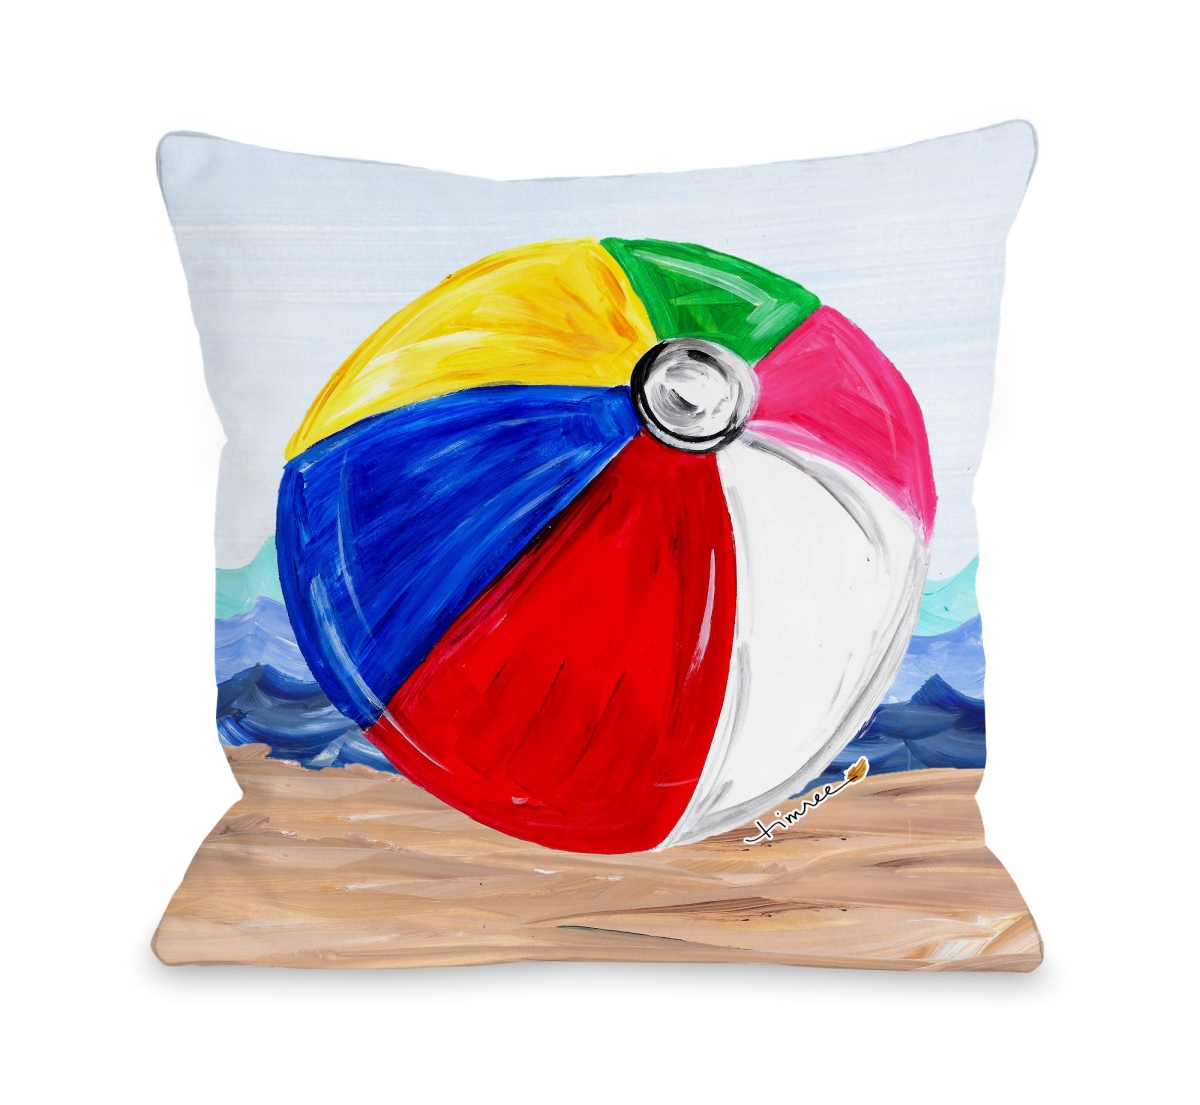 16 X 16 In. Beachball Pillow By Timree, Multicolor